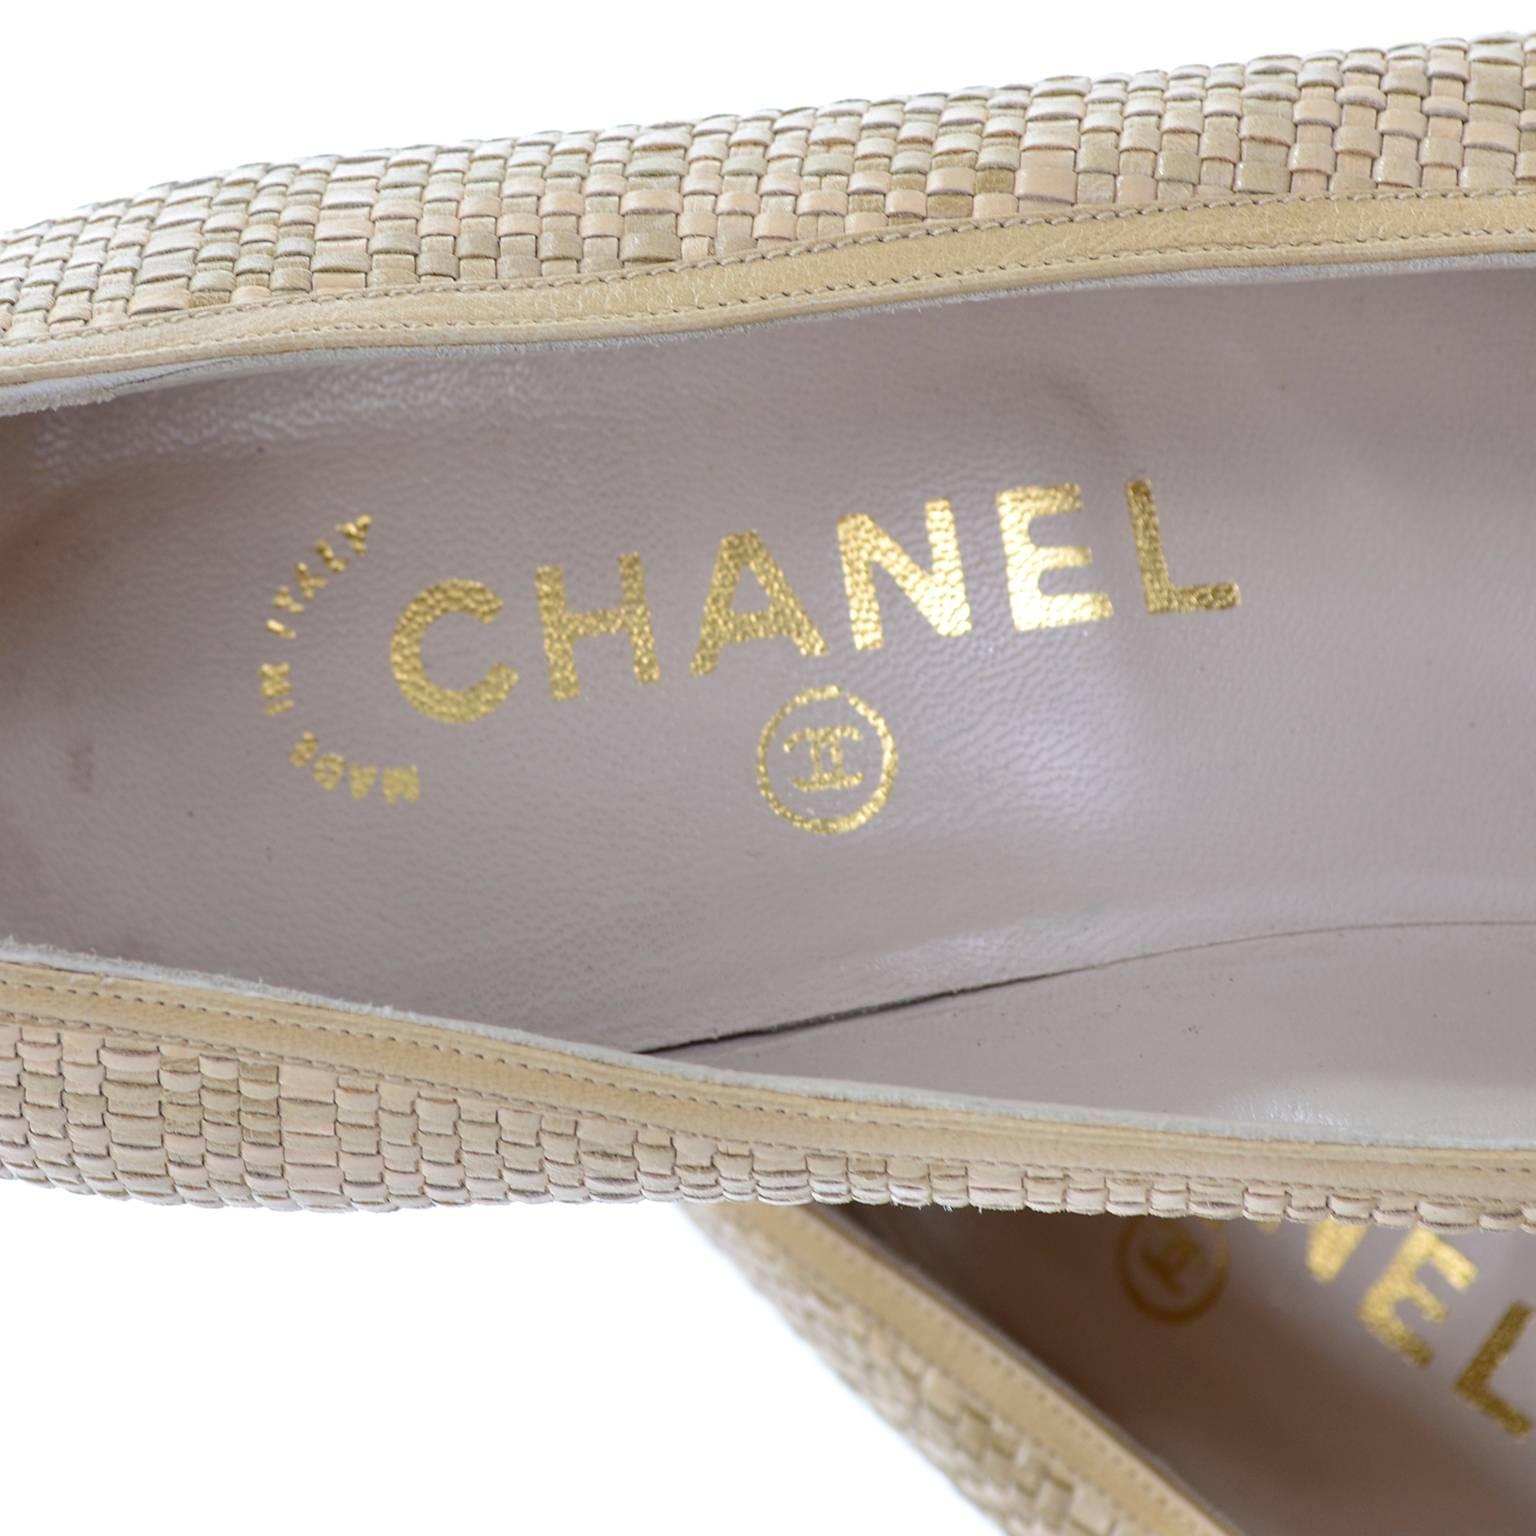 Chanel Vintage Pumps Woven Shoes With Tan Leather Trim in Size 8.5 In Good Condition For Sale In Portland, OR